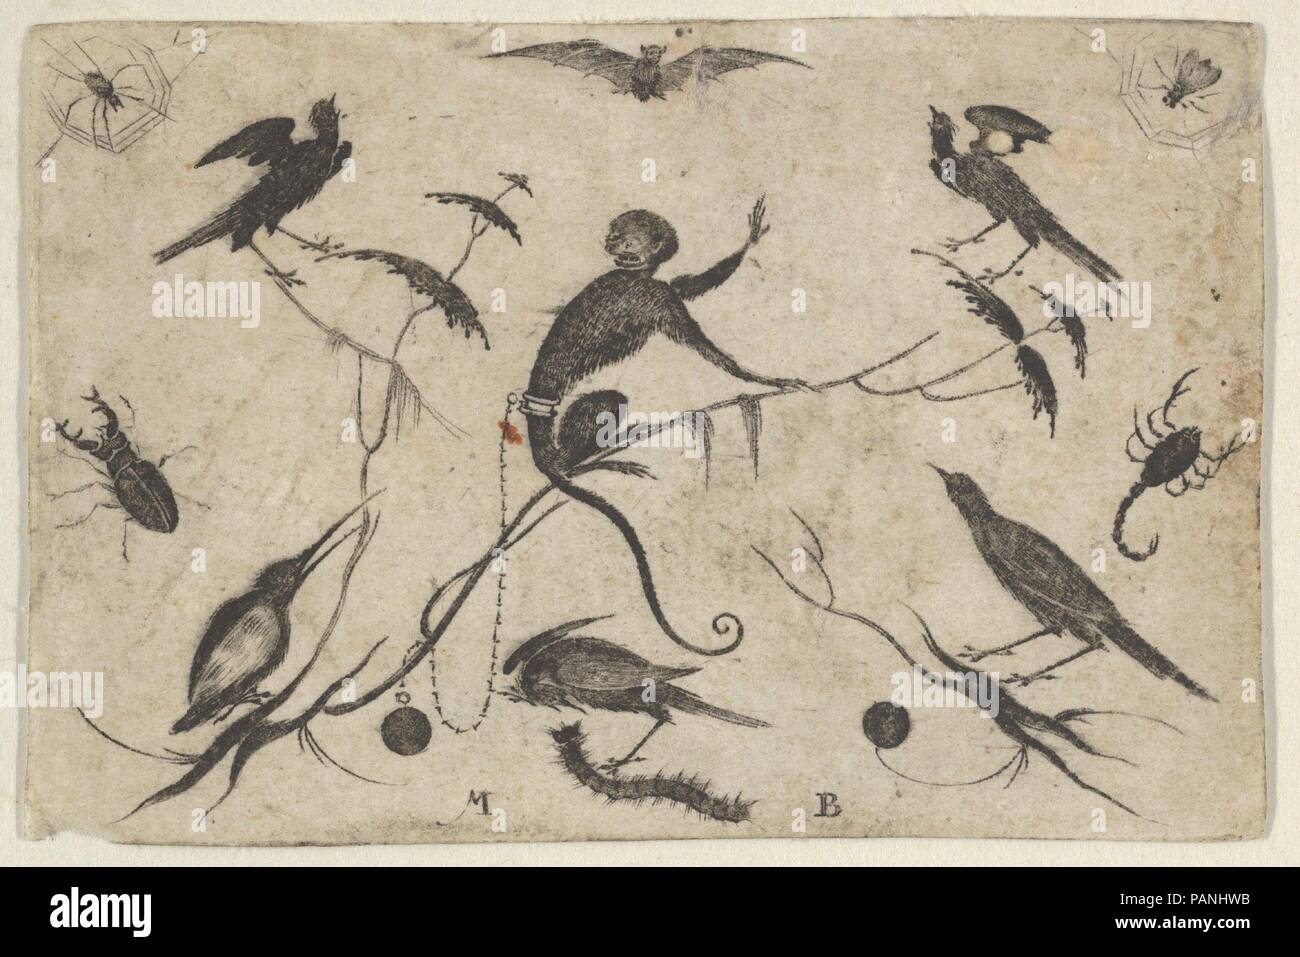 Blackwork Design for Goldsmithwork with Monkey, Birds, and Insects. Artist: Mathais Beitler (German, Ansbach, active ca. 1582-1616). Dimensions: Sheet: 1 9/16 × 2 5/16 in. (3.9 × 5.8 cm). Date: 1582-1616.  Ornamental panel with a monkey facing to the right on a limb, surrounded by birds. At edges of the plate are various insects, including a spider, beetle and fly. At top center, a bat. Museum: Metropolitan Museum of Art, New York, USA. Stock Photo